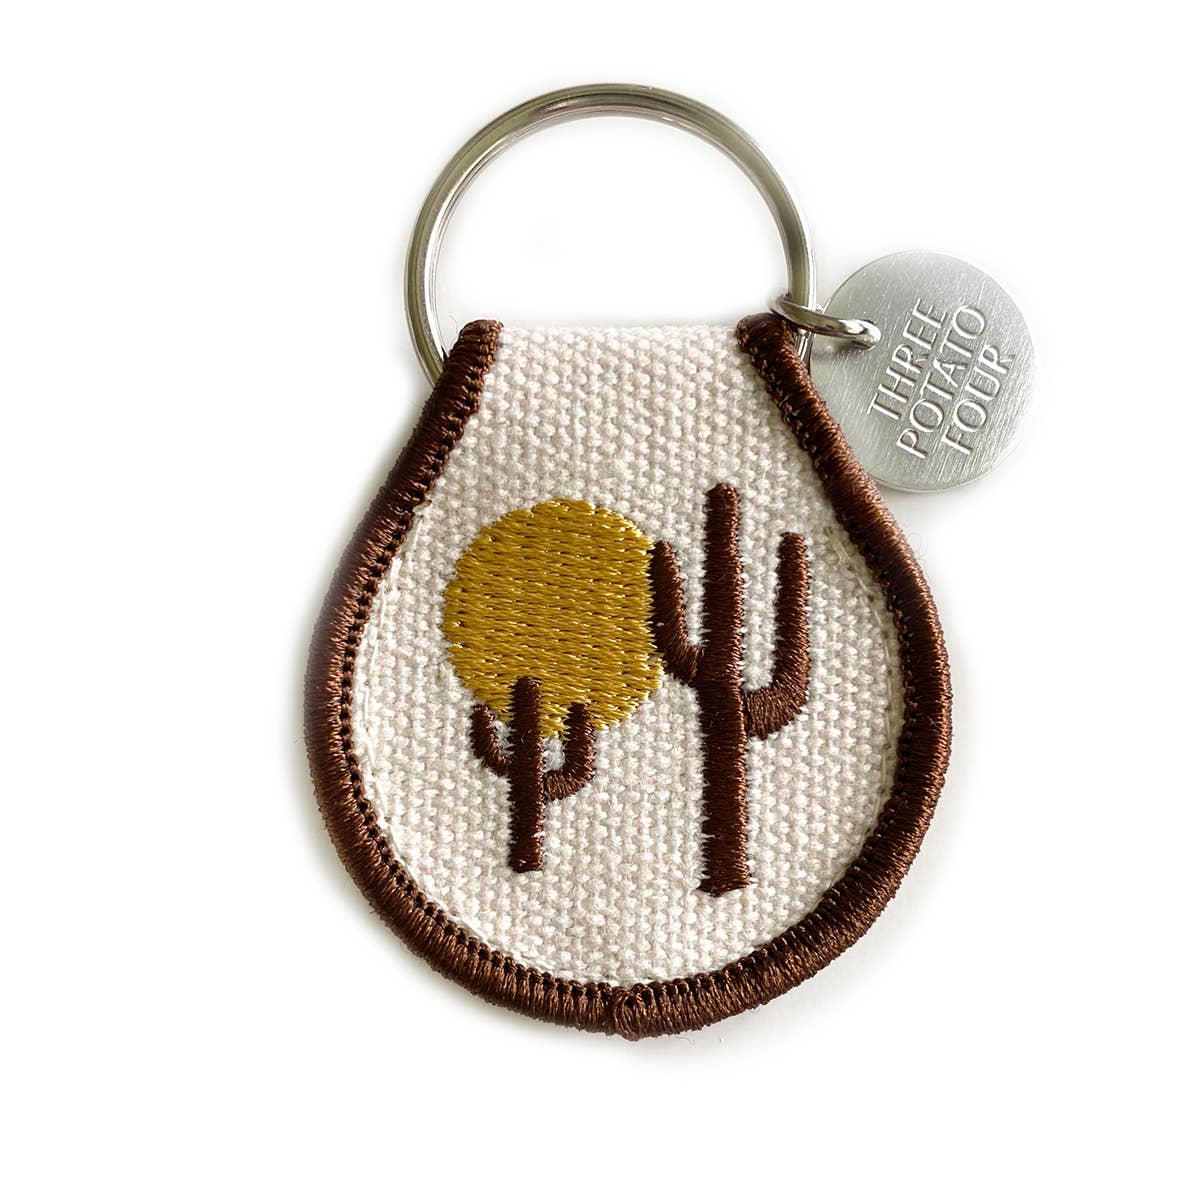 A Patch Keychain - Desert Vibes by Three Potato Four with a cactus on it.